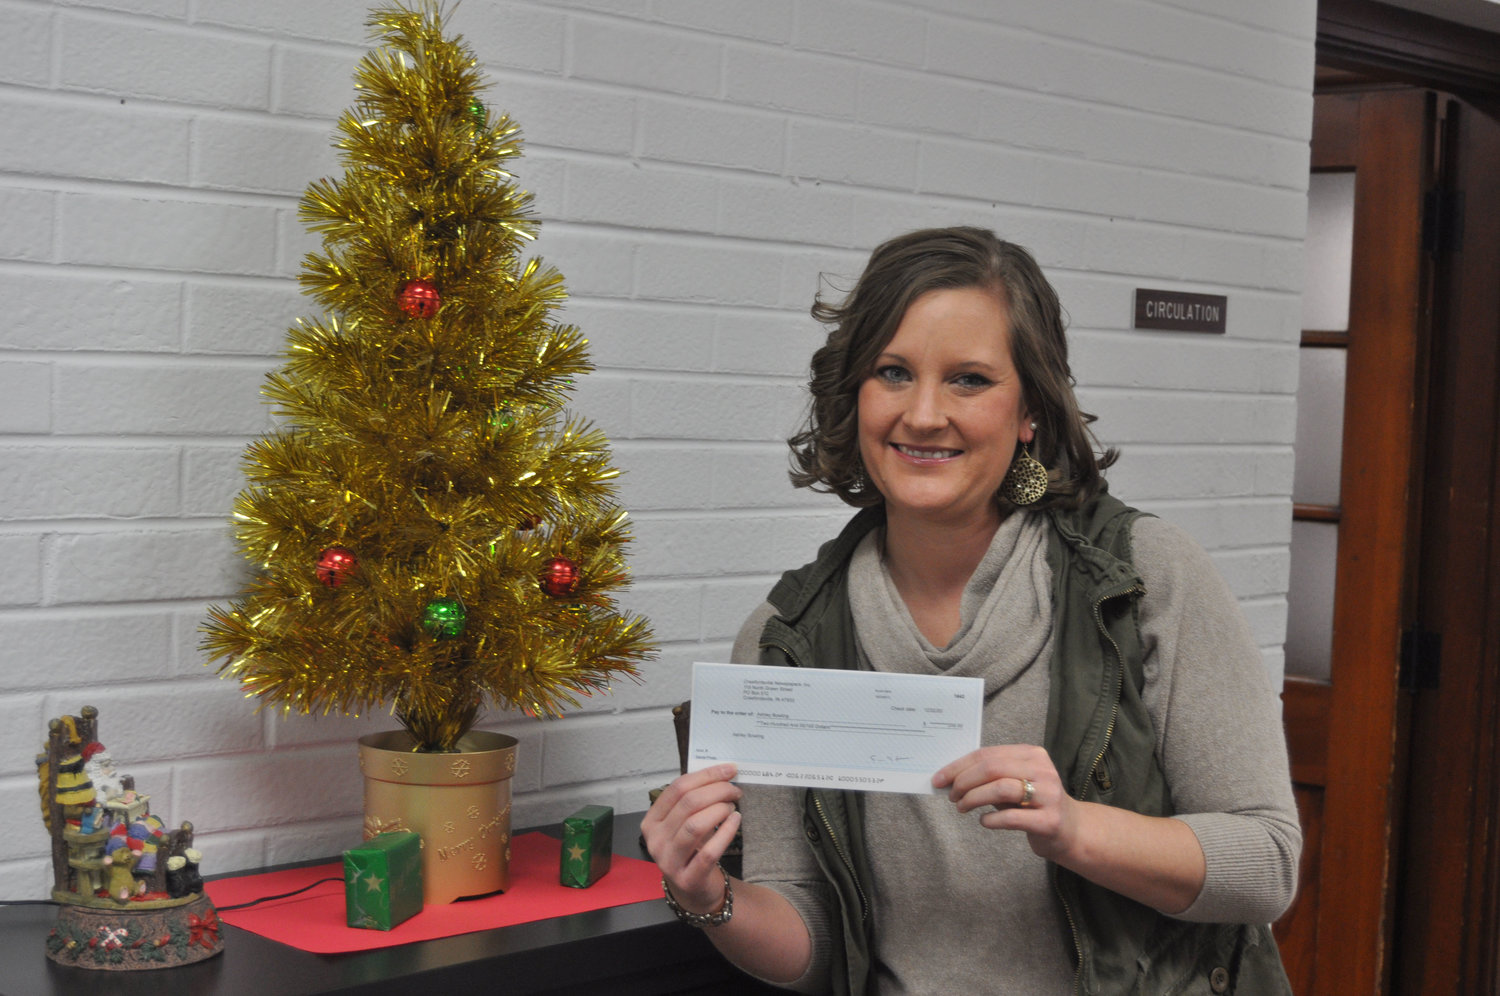 Ashley Bowling was the winner of the Journal Review’s Santa photo contest, winning a $200 monetary prize.